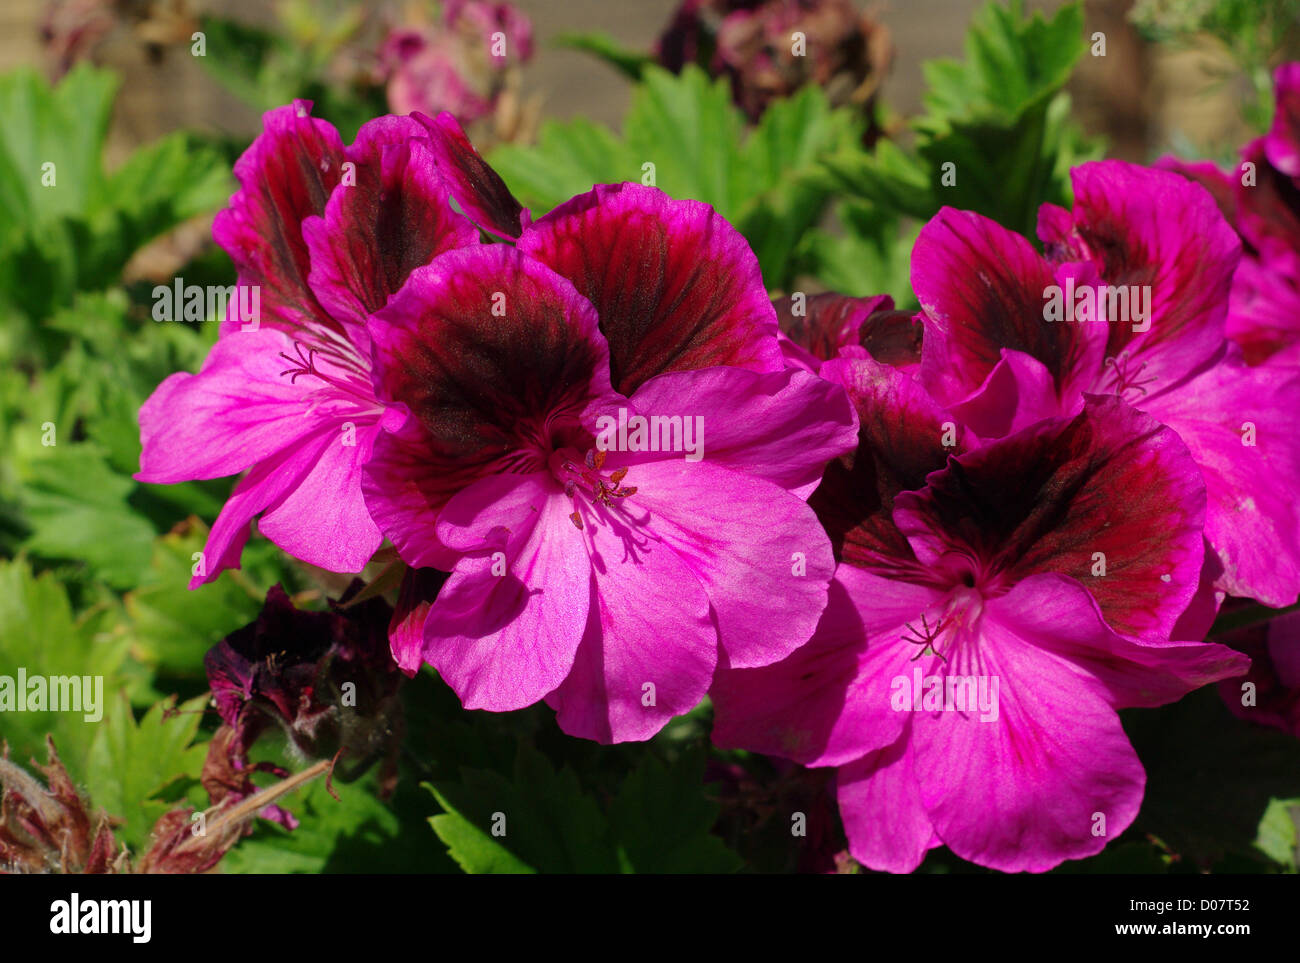 A Close Up View Of The Washington State Flower The Coast Stock Photo Alamy